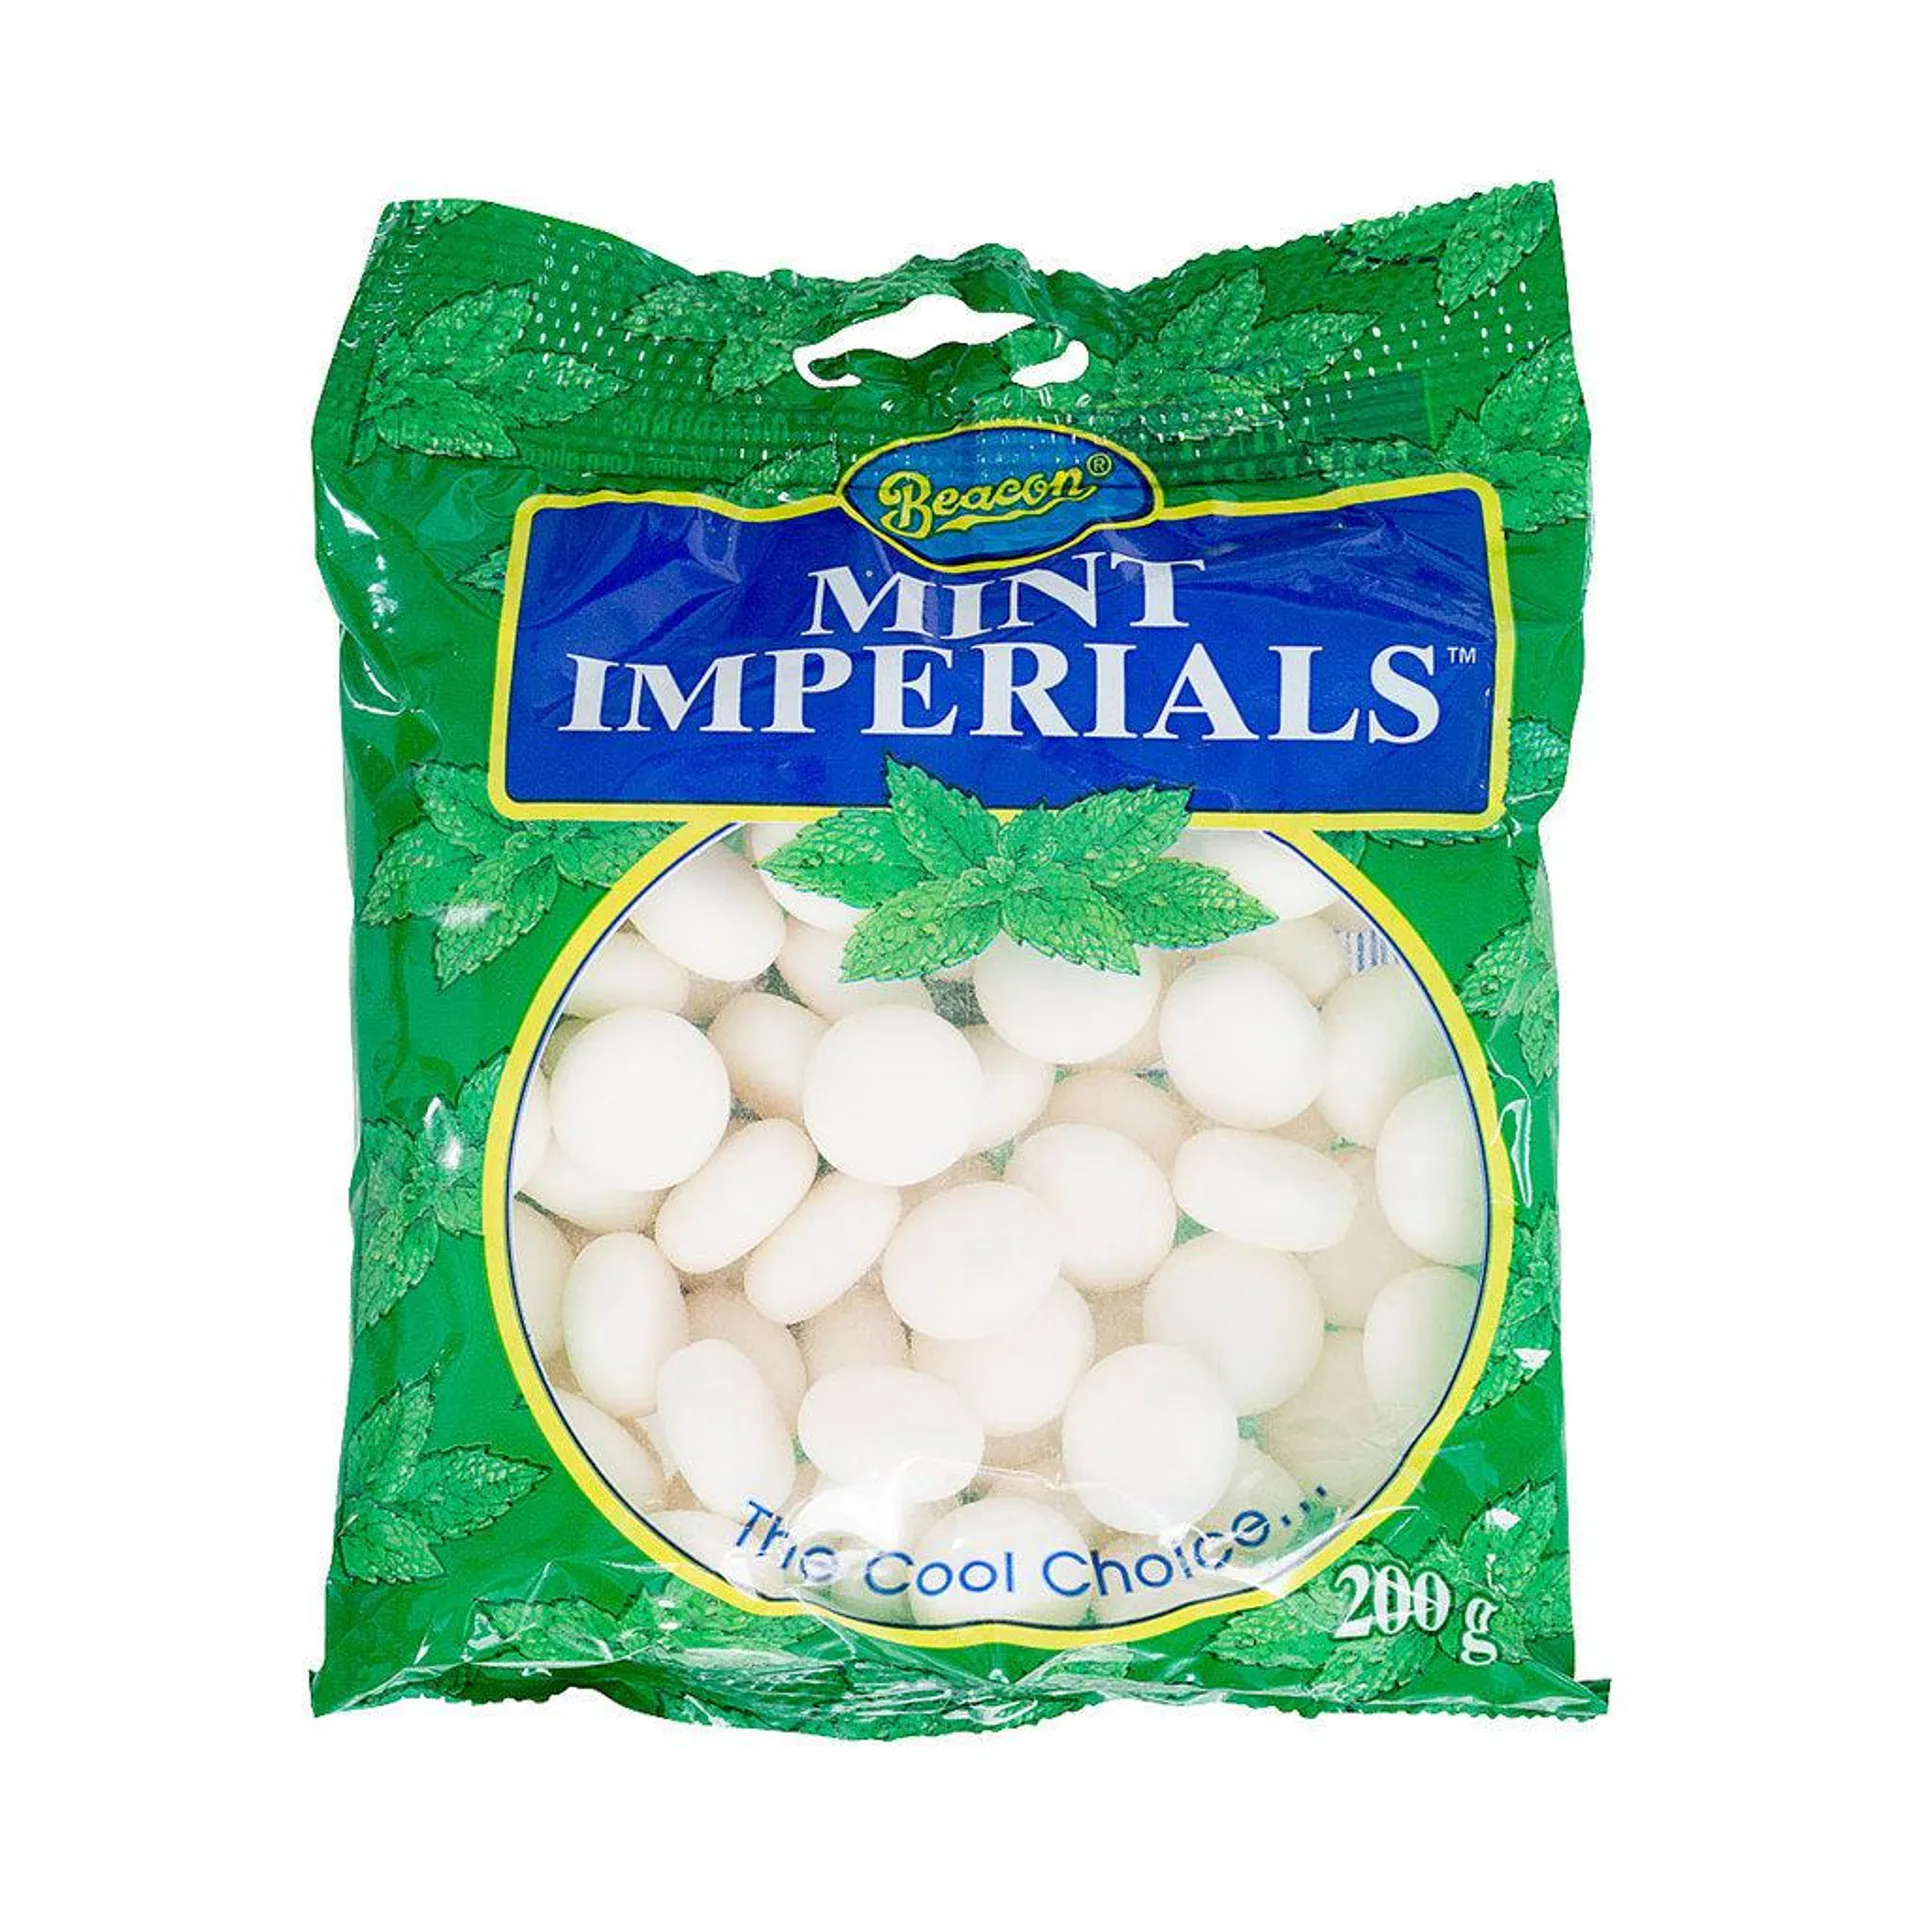 Beacon Imperial Mints Sharebag 200g